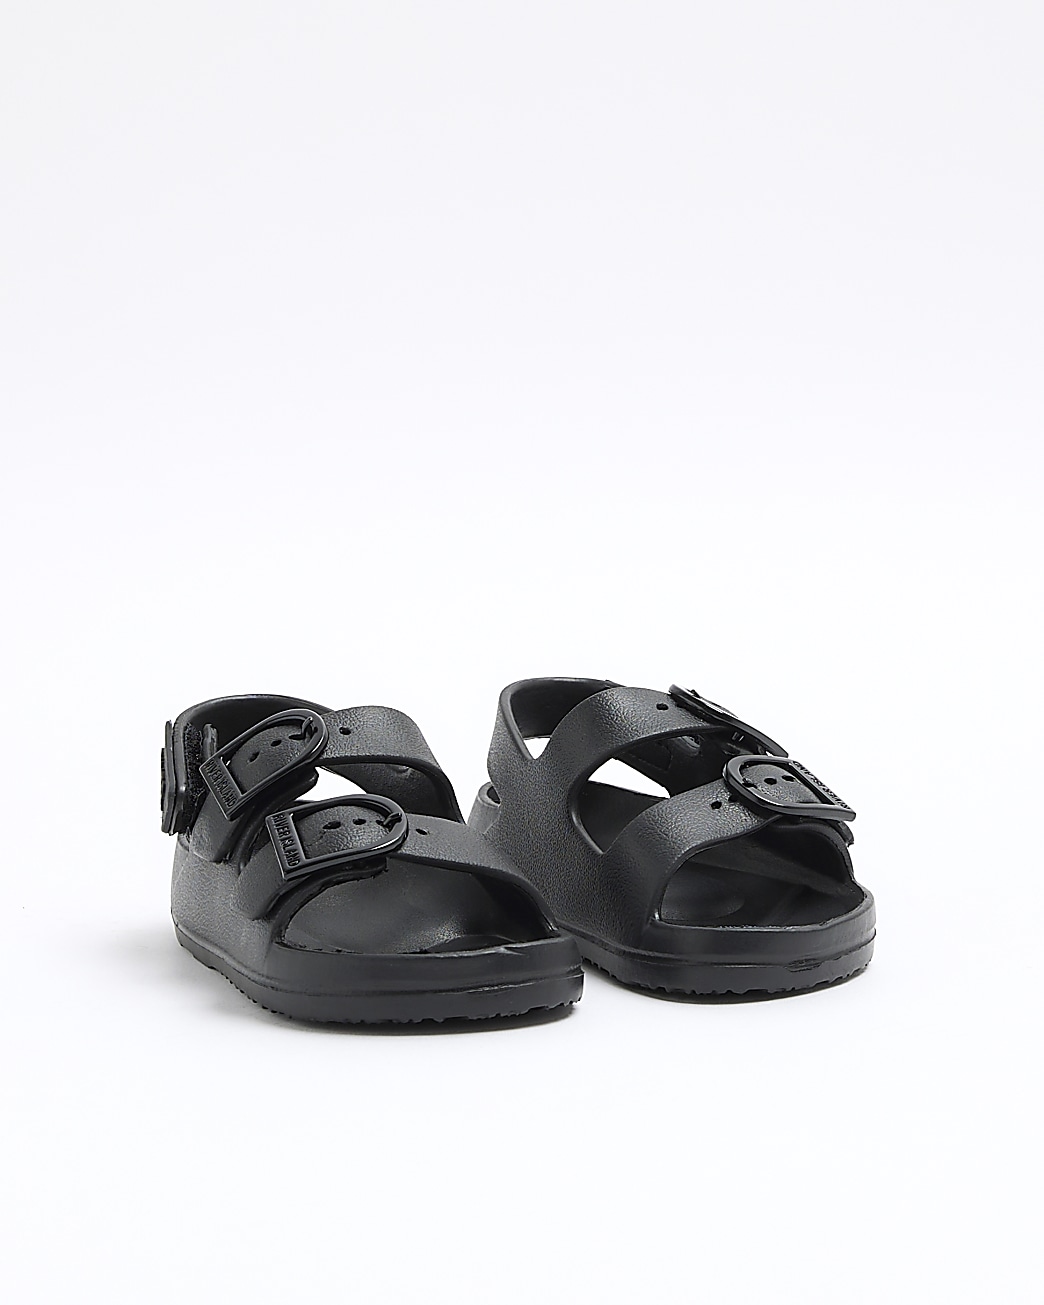 Visual filter display for Baby Boys Shoes & Sandals